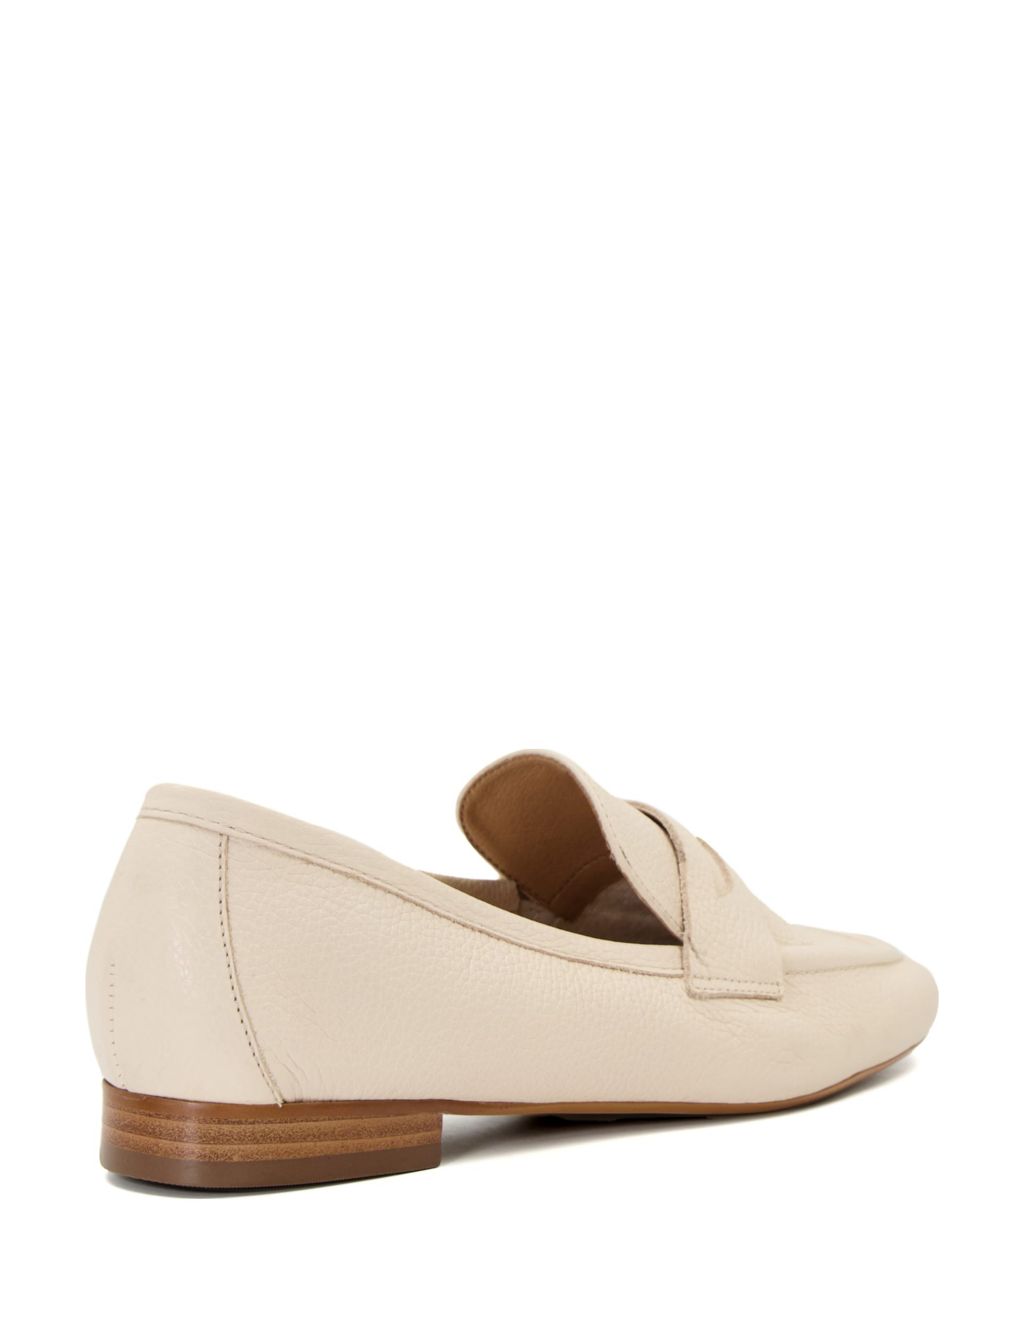 Leather Slip On Loafers image 5